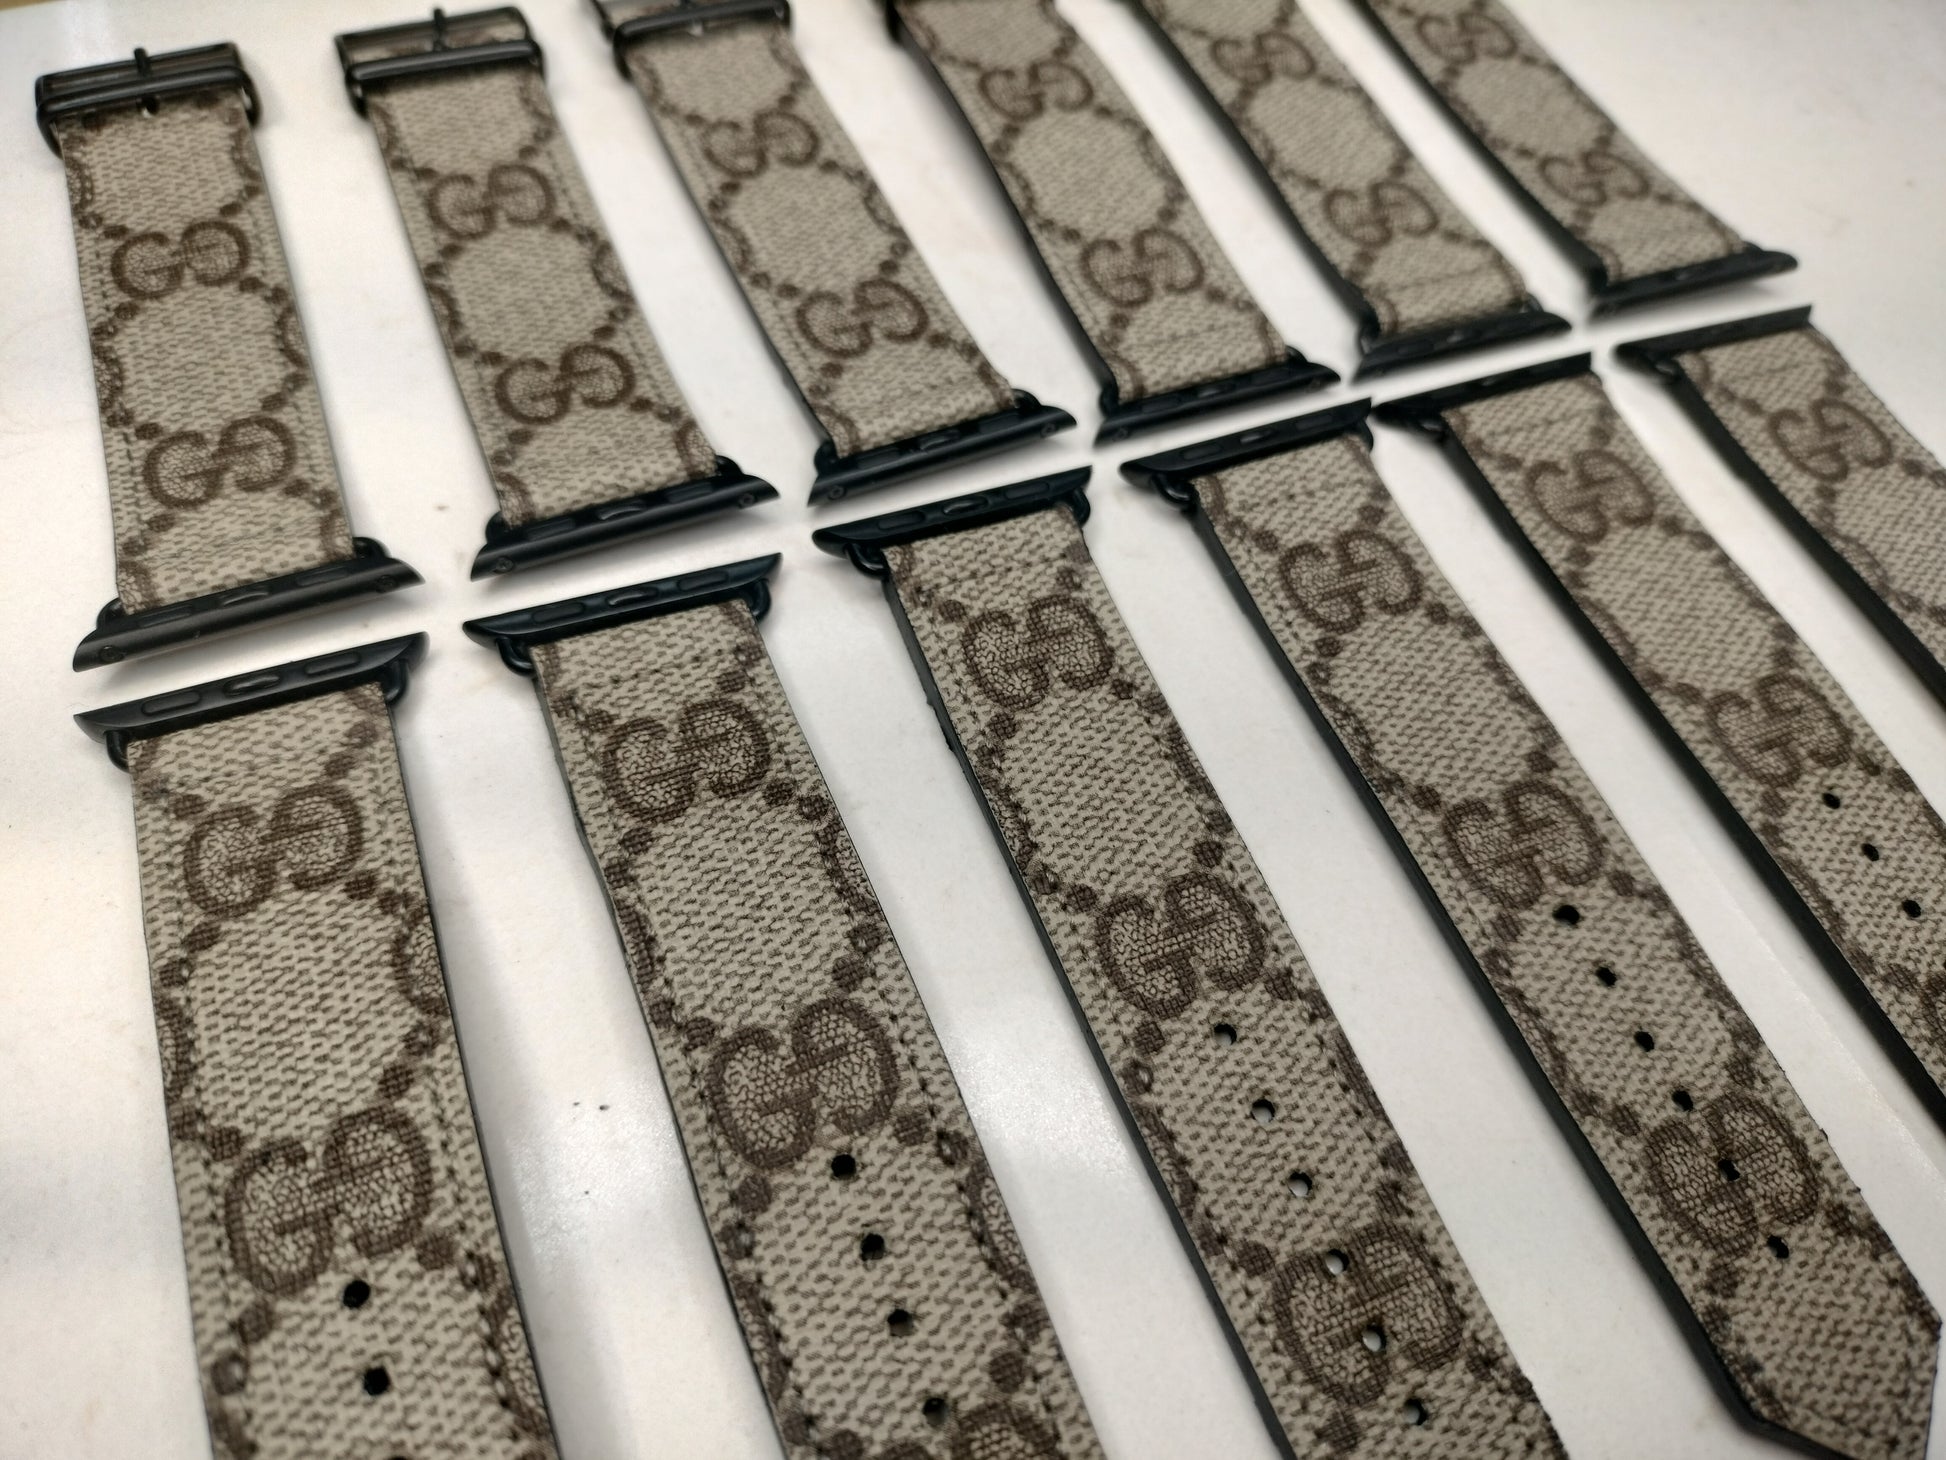 Upcycled Gucci Apple Watch Band - GG. Supreme *Final Sale*